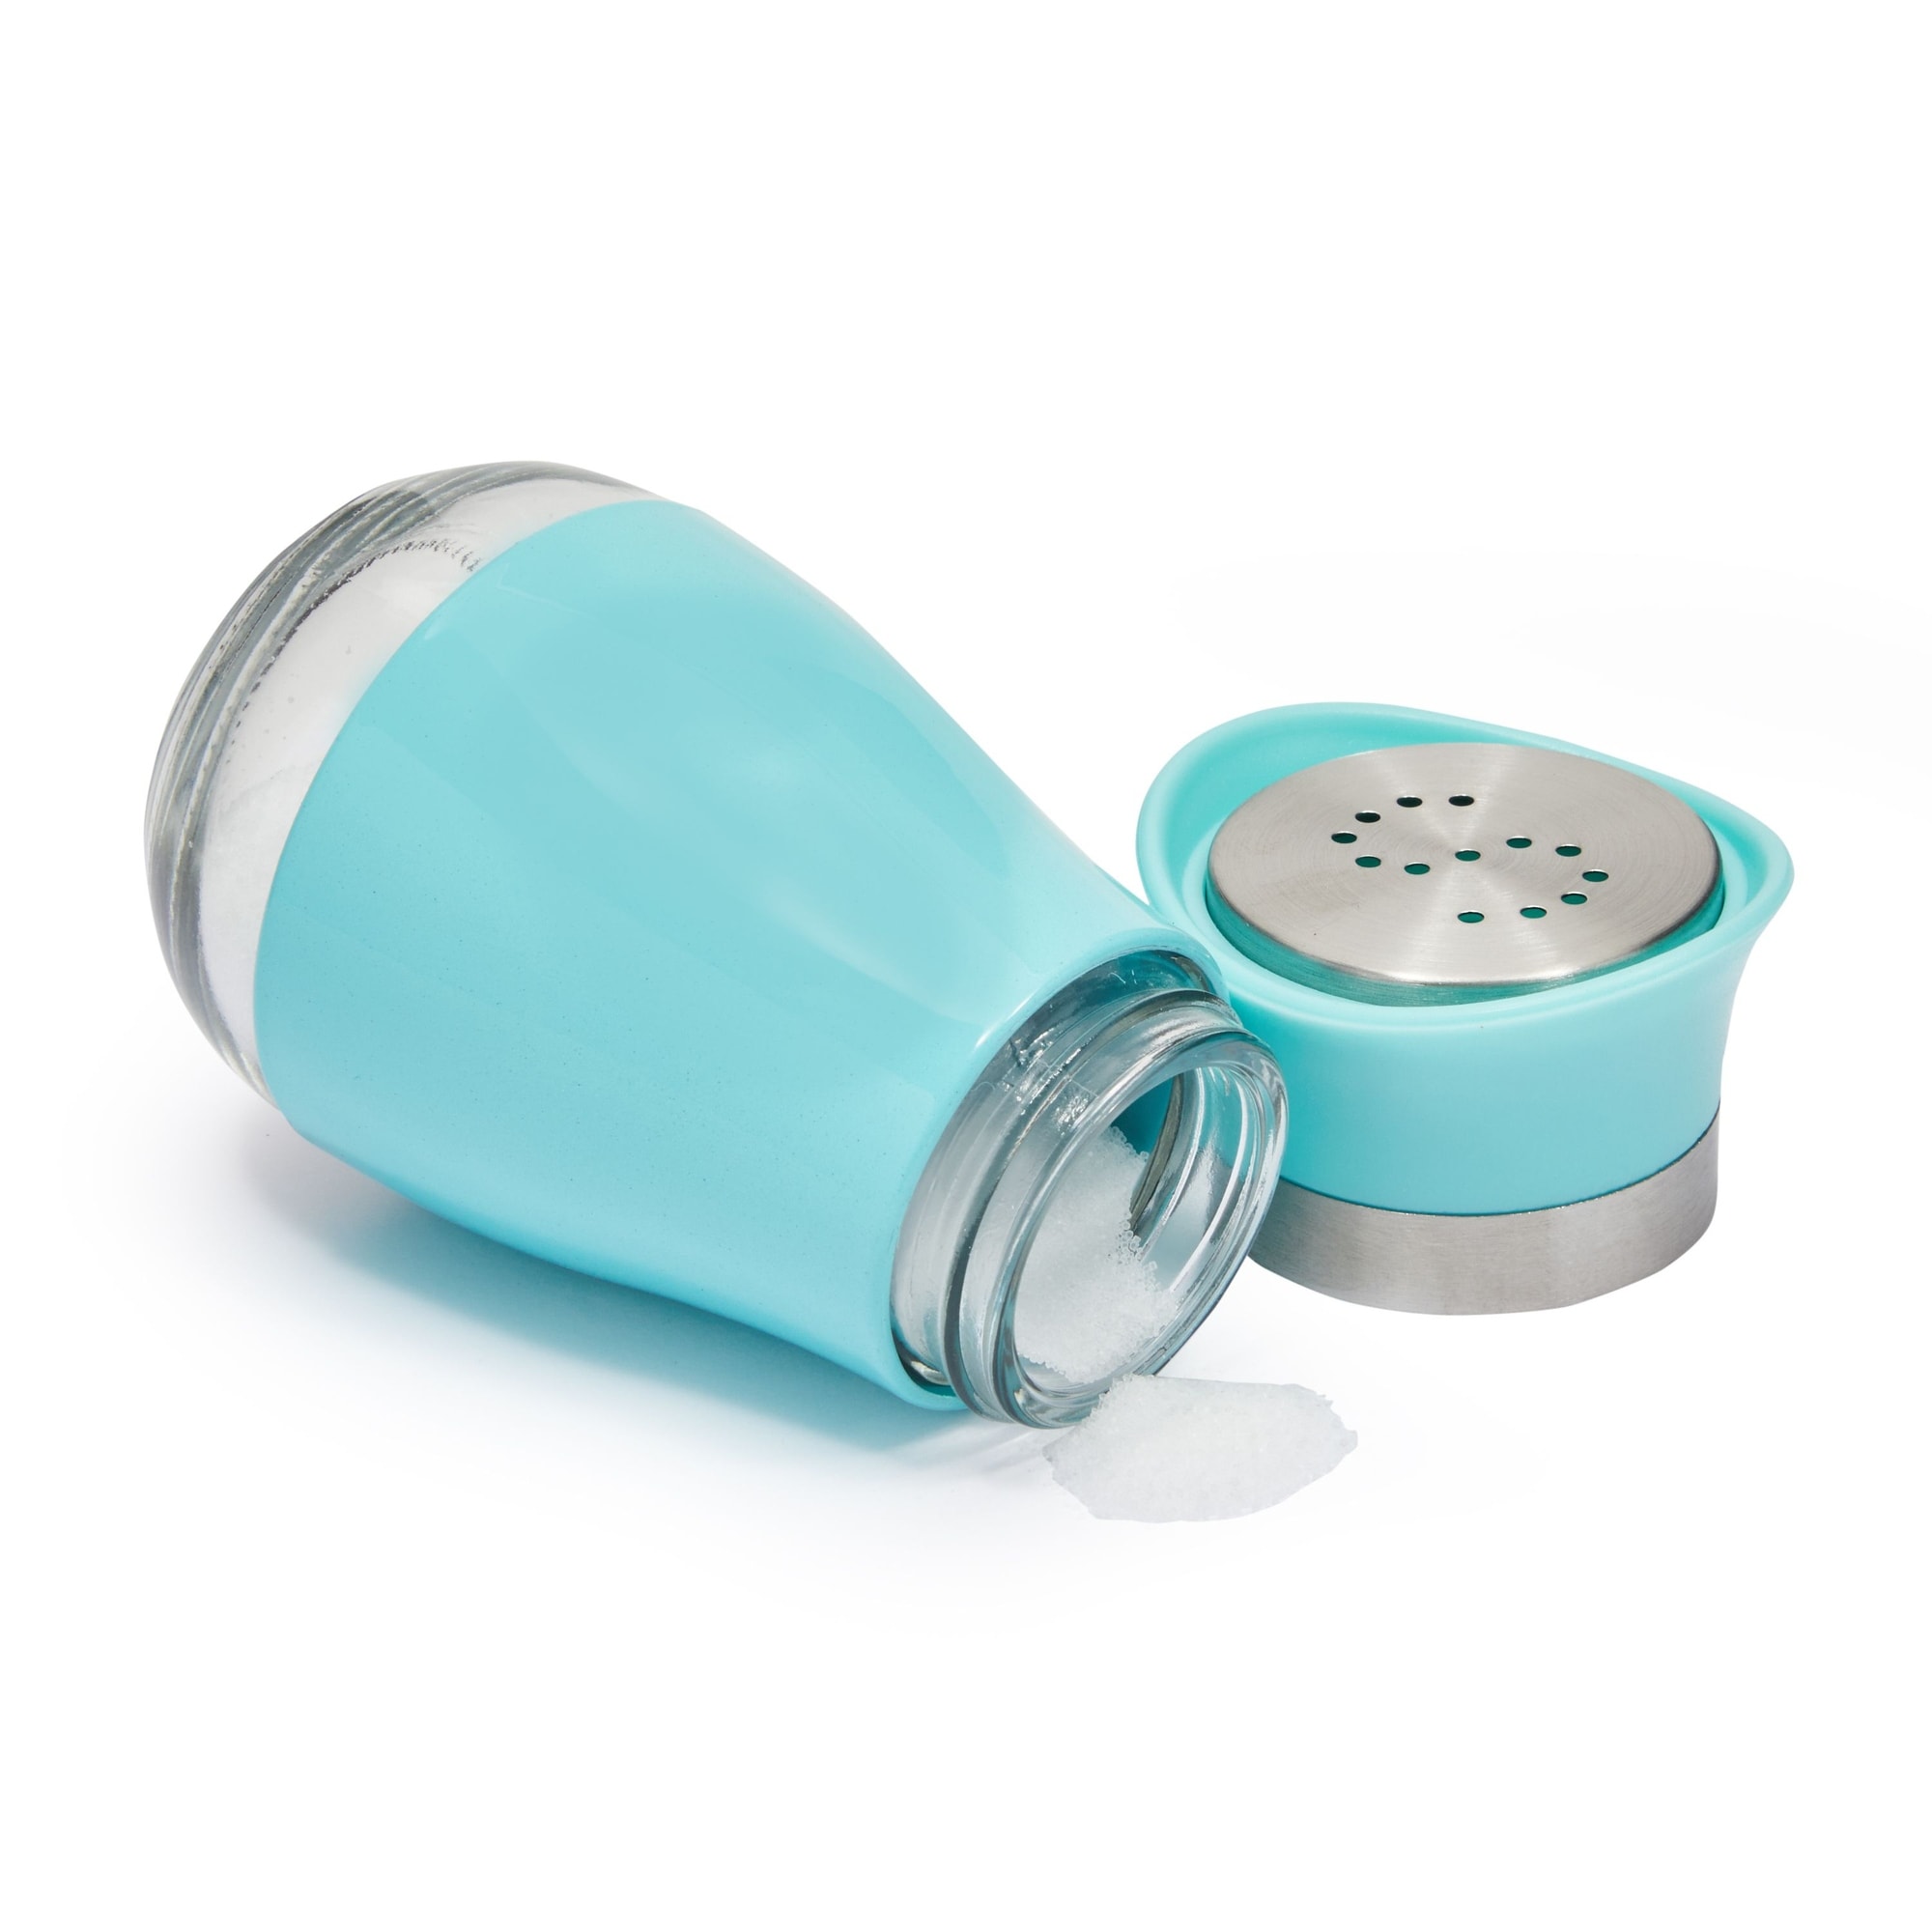 https://ak1.ostkcdn.com/images/products/is/images/direct/47d1f2ac3bf4ec9351c71ca935796d18fe113973/Teal-Salt-and-Pepper-Shakers-with-Glass-Bottom%2C-Stainless-Steel-Refillable-%282-Piece-Set%29.jpg